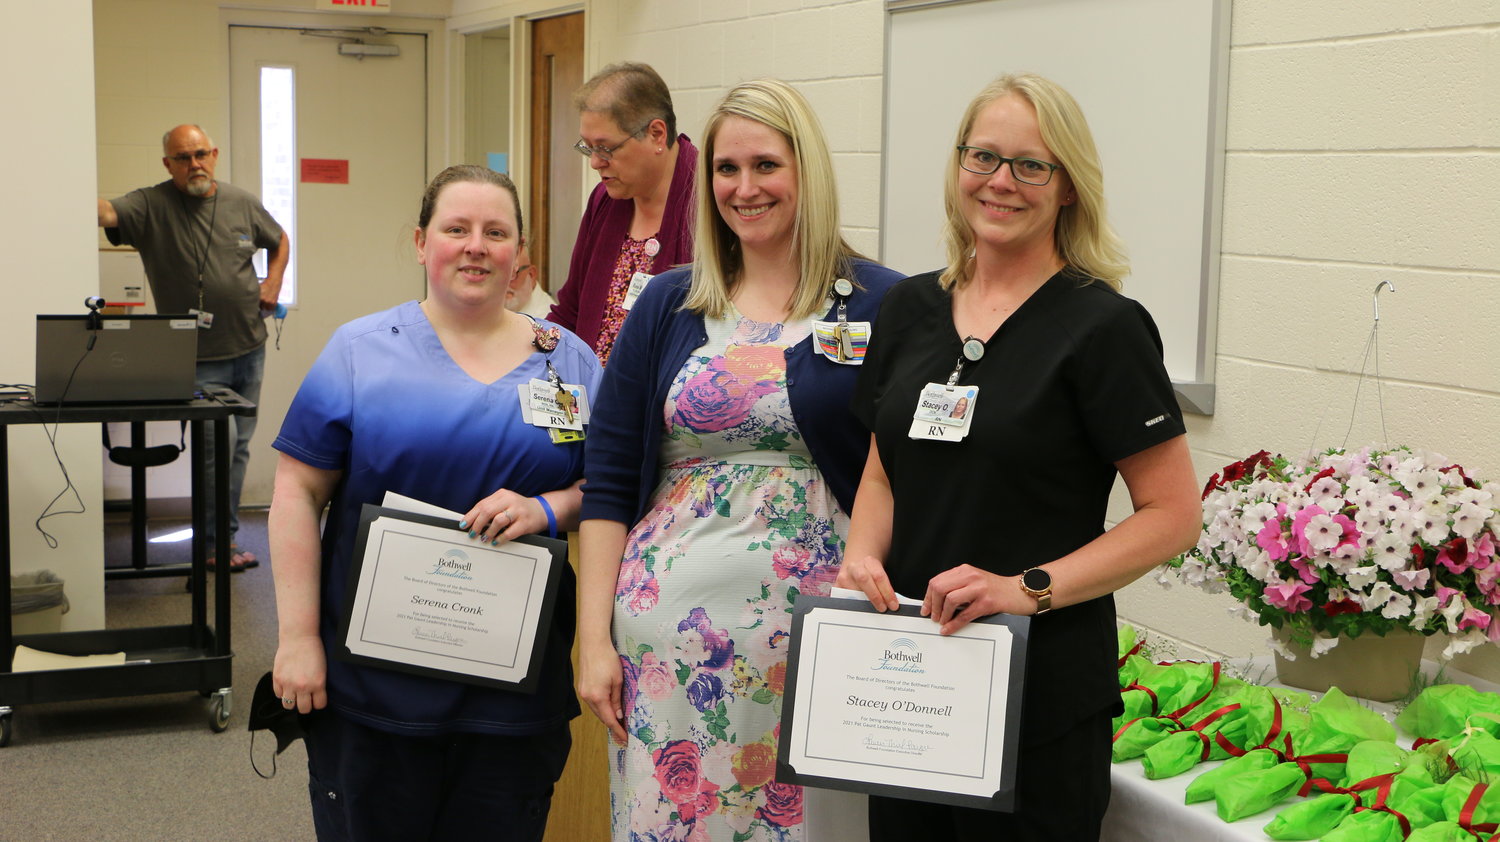 Lauren Thiel-Payne, Bothwell Foundation executive director, center, with Pat Gaunt Nursing Scholarship recipients Serena Cronk, left, and Stacey O’Donnell, right. Recipient Cary Hovendick is not pictured.